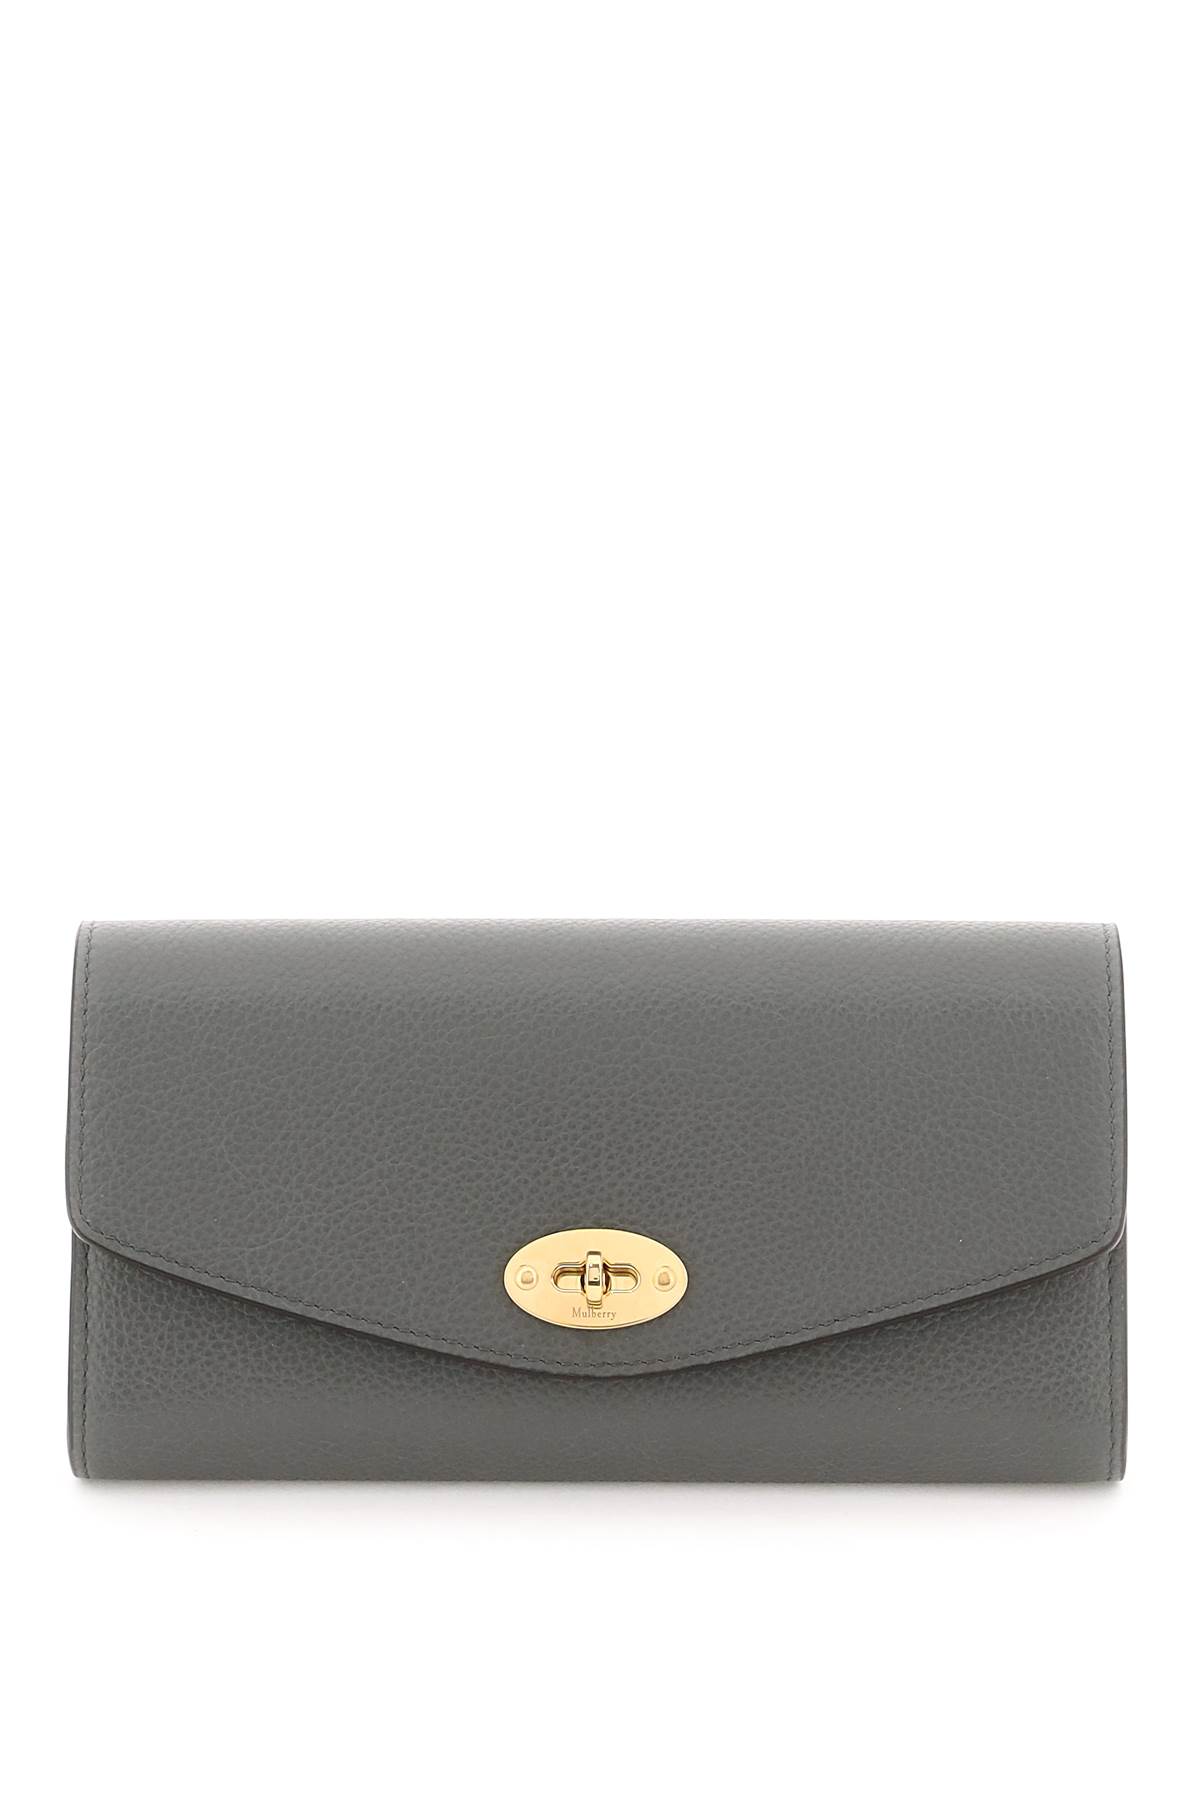 Mulberry Darley Wallet In Charcoal (grey)